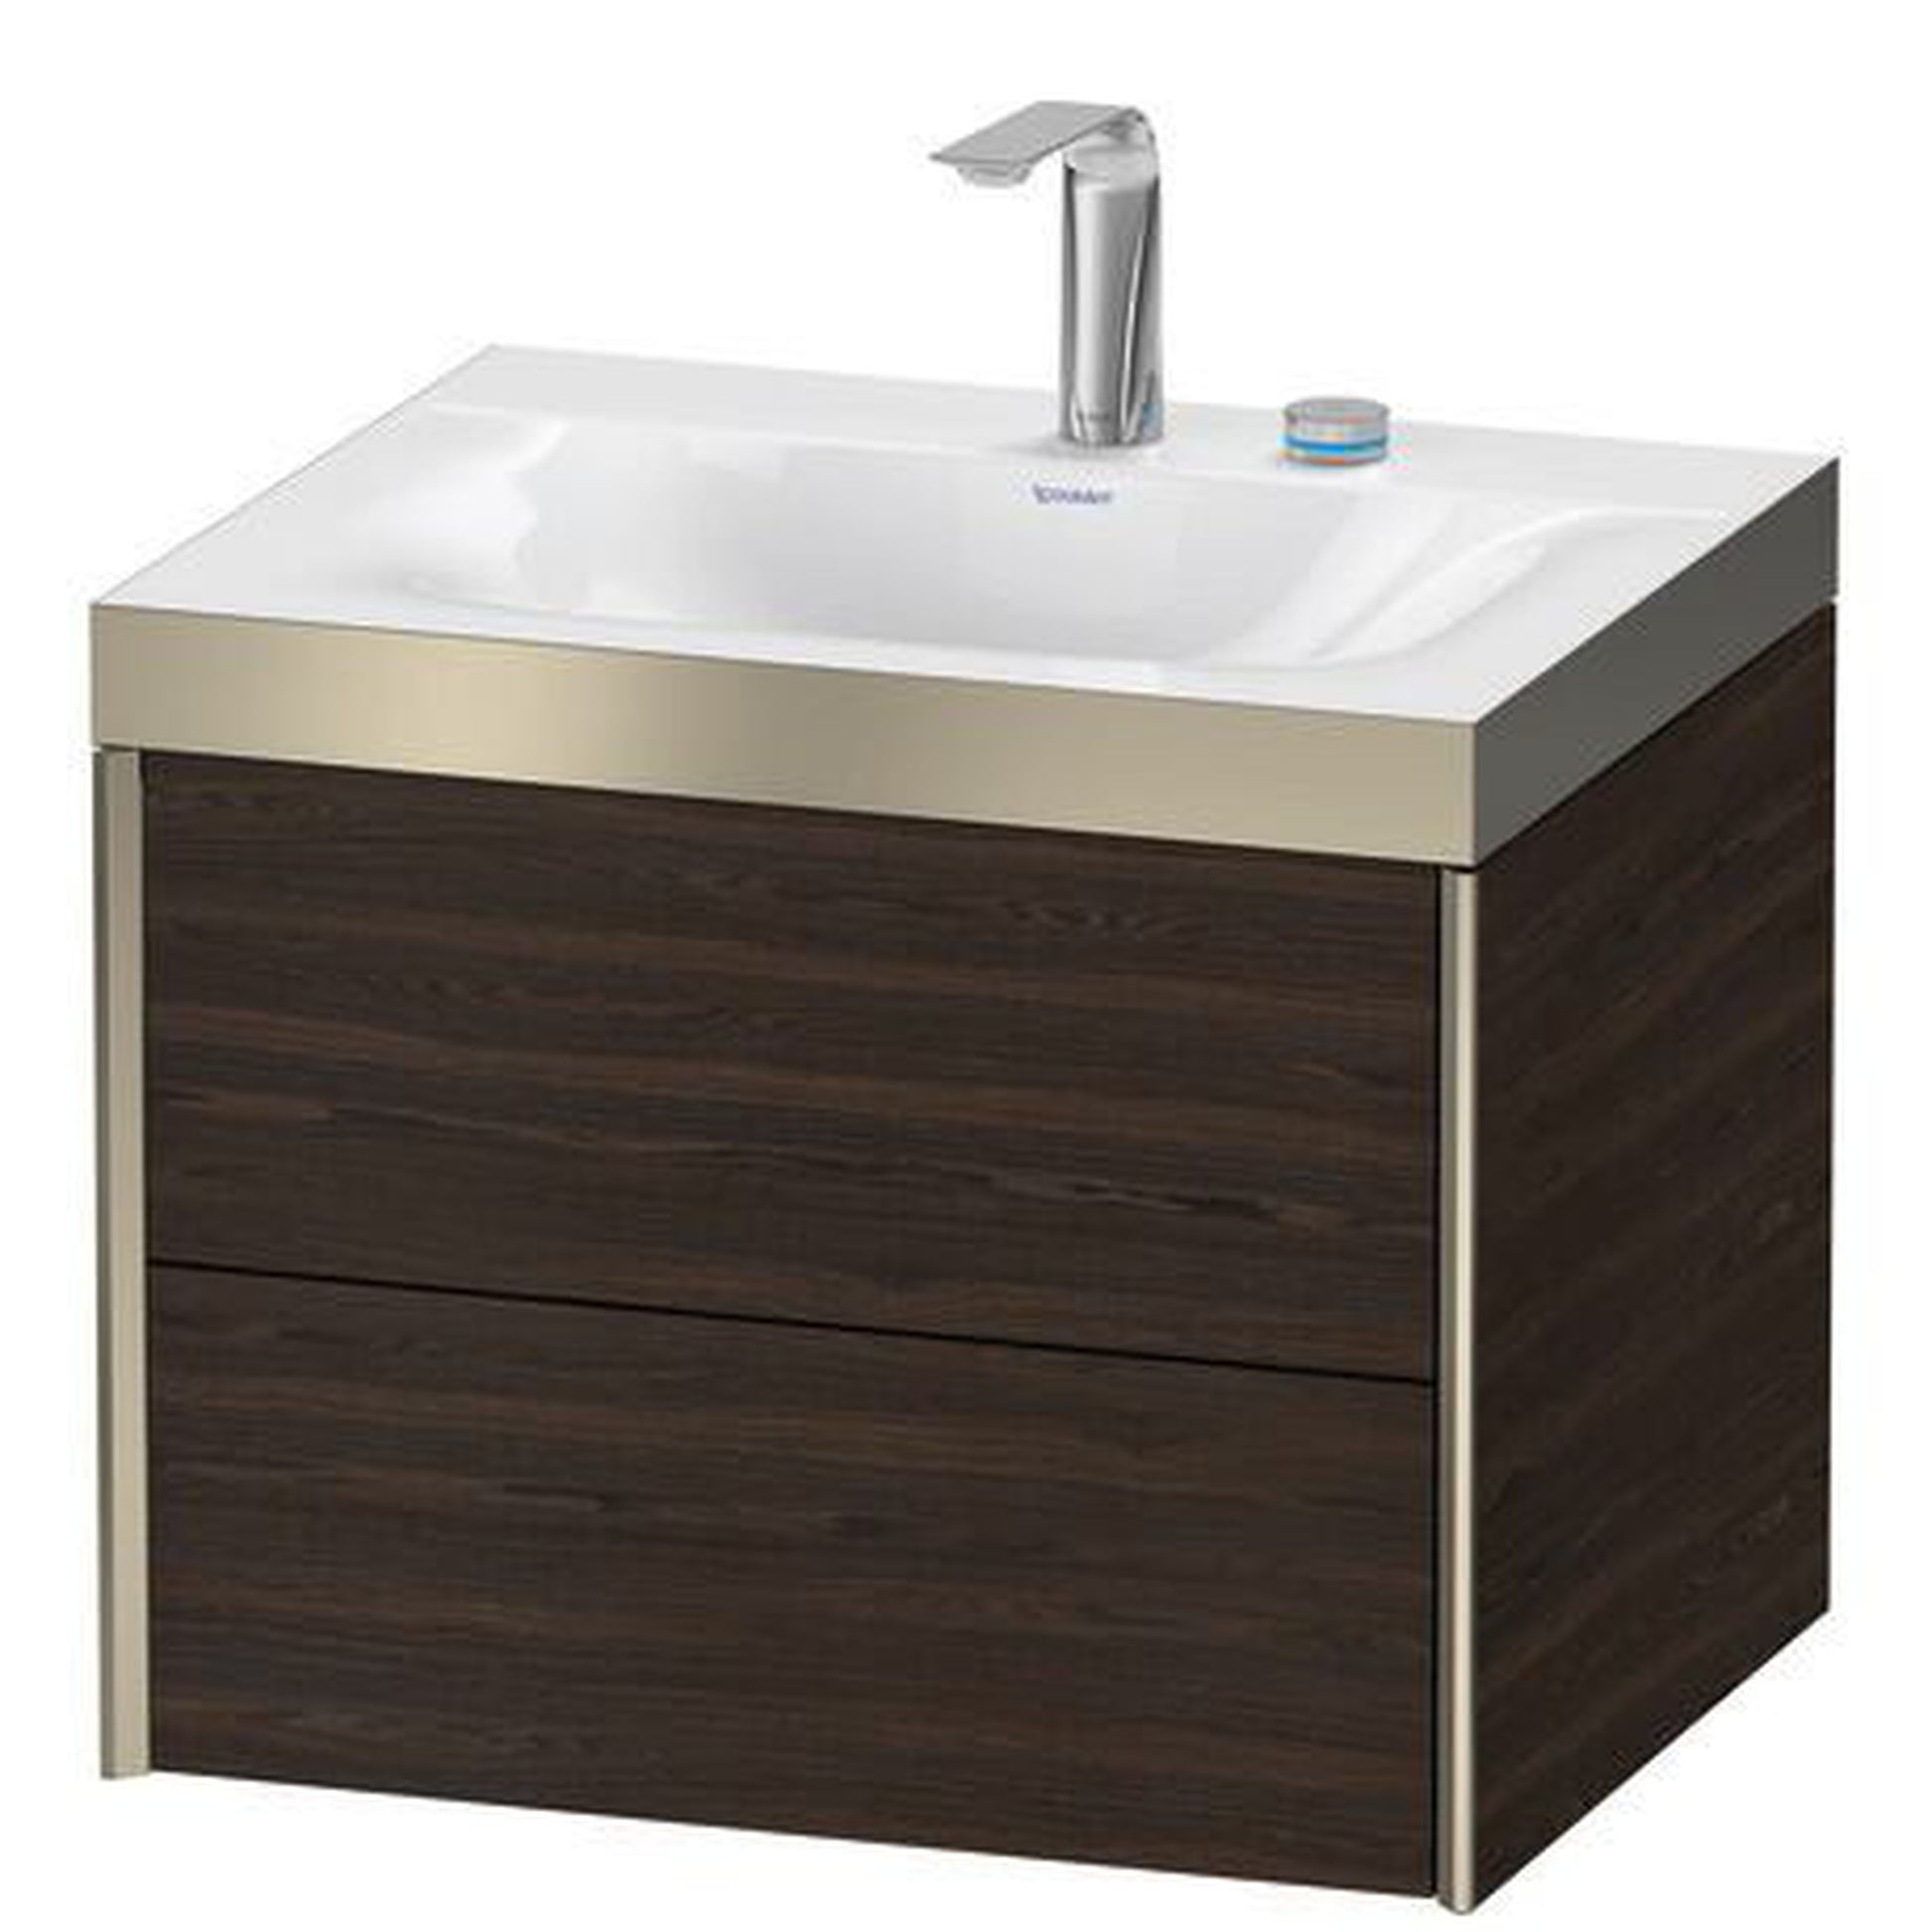 Duravit Xviu 24" x 20" x 19" Two Drawer C-Bonded Wall-Mount Vanity Kit With Two Tap Holes, Walnut Brushed (XV4614EB169P)